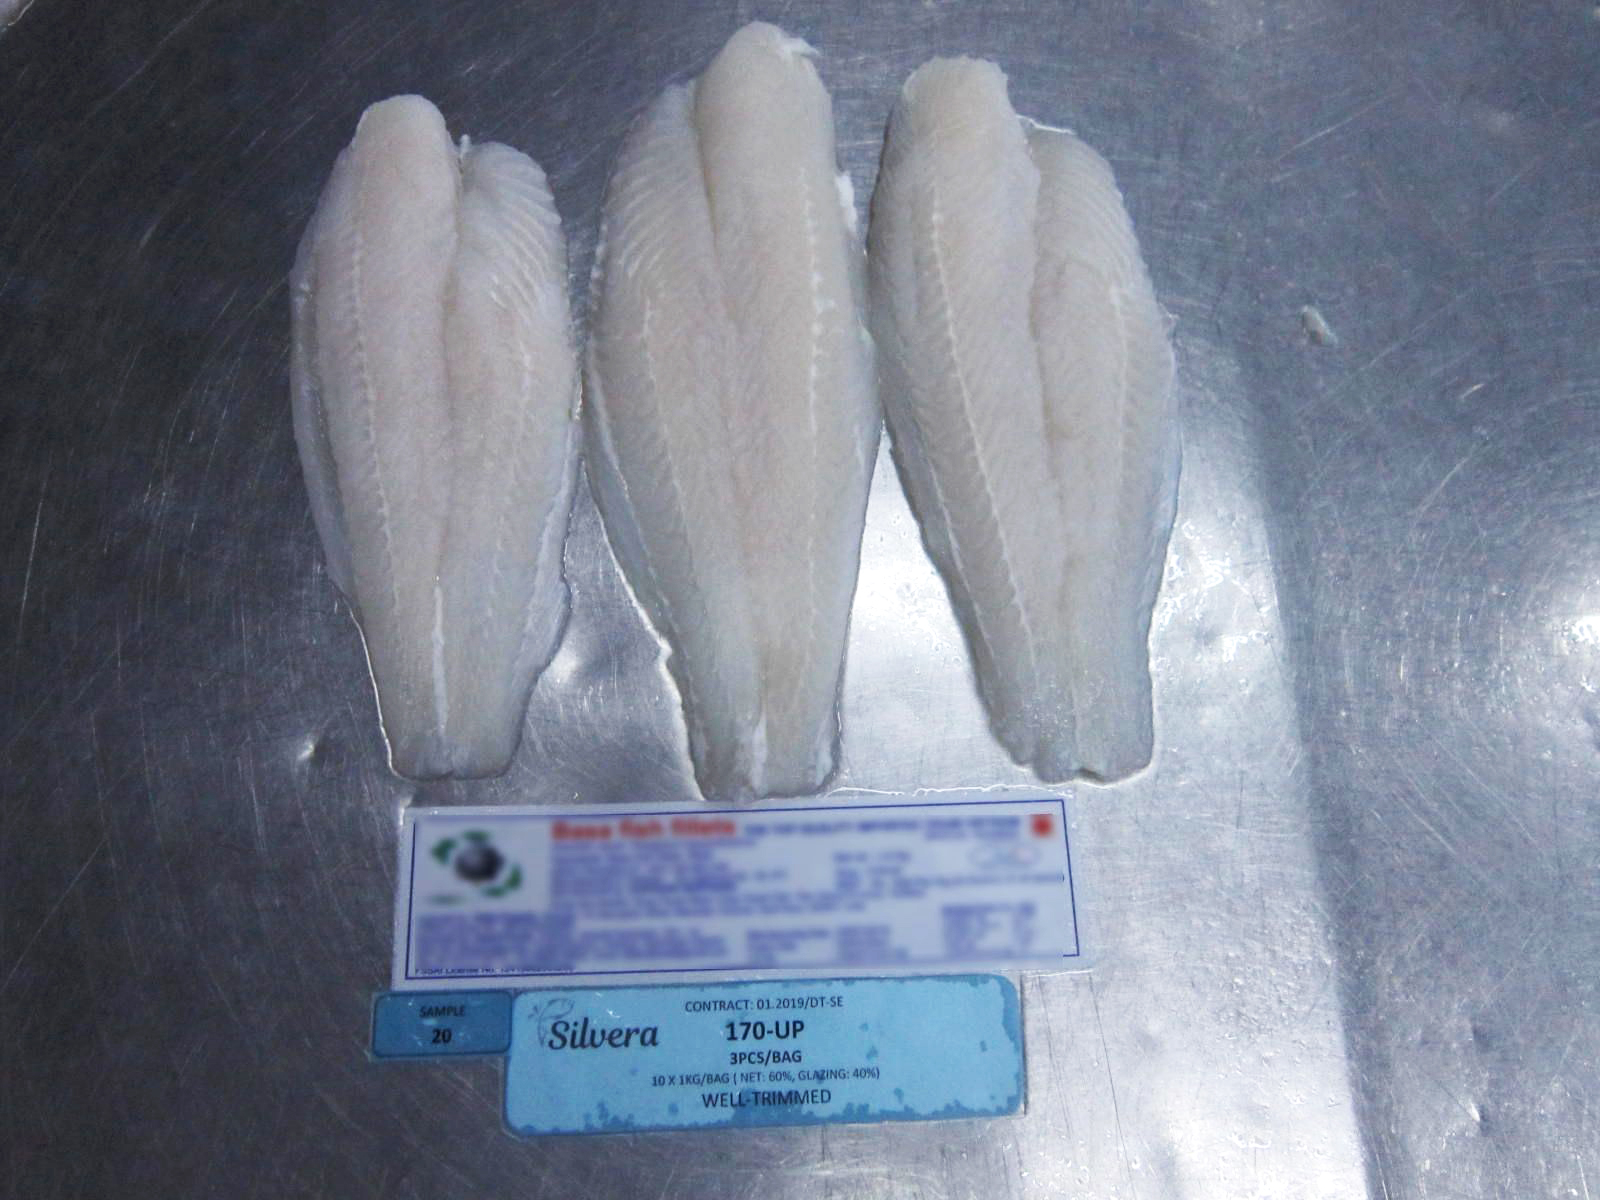 Checking Texture Of Defrosted Pangasius Well-Trimmed Fillets